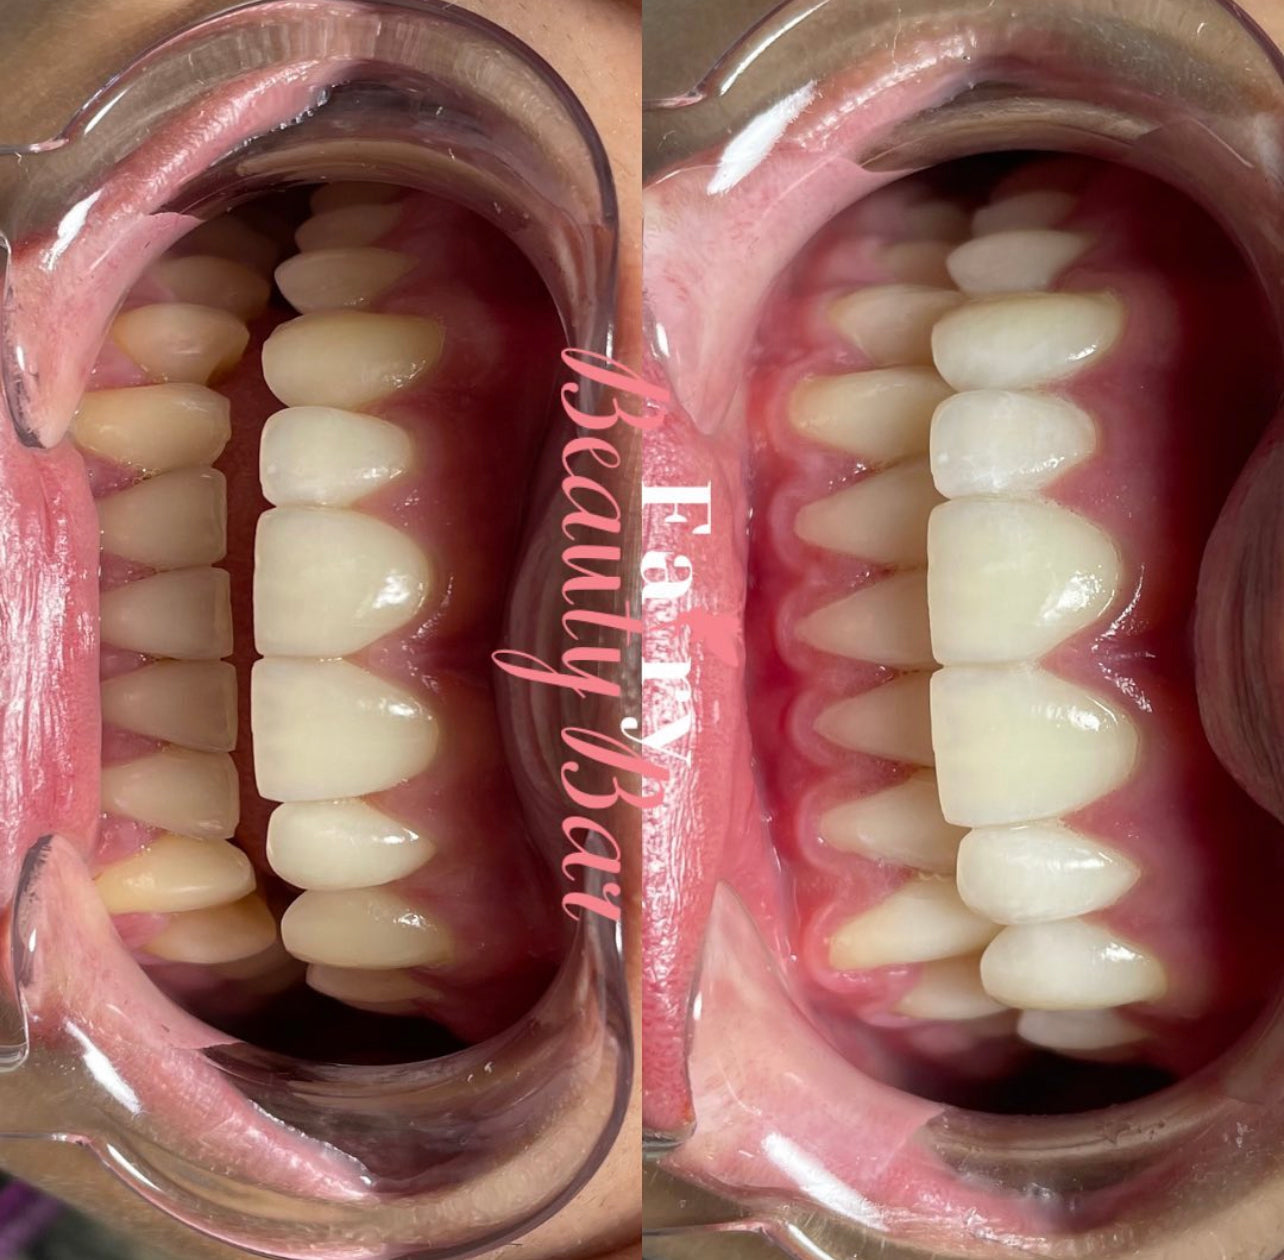 Professional Teeth Whitening Course